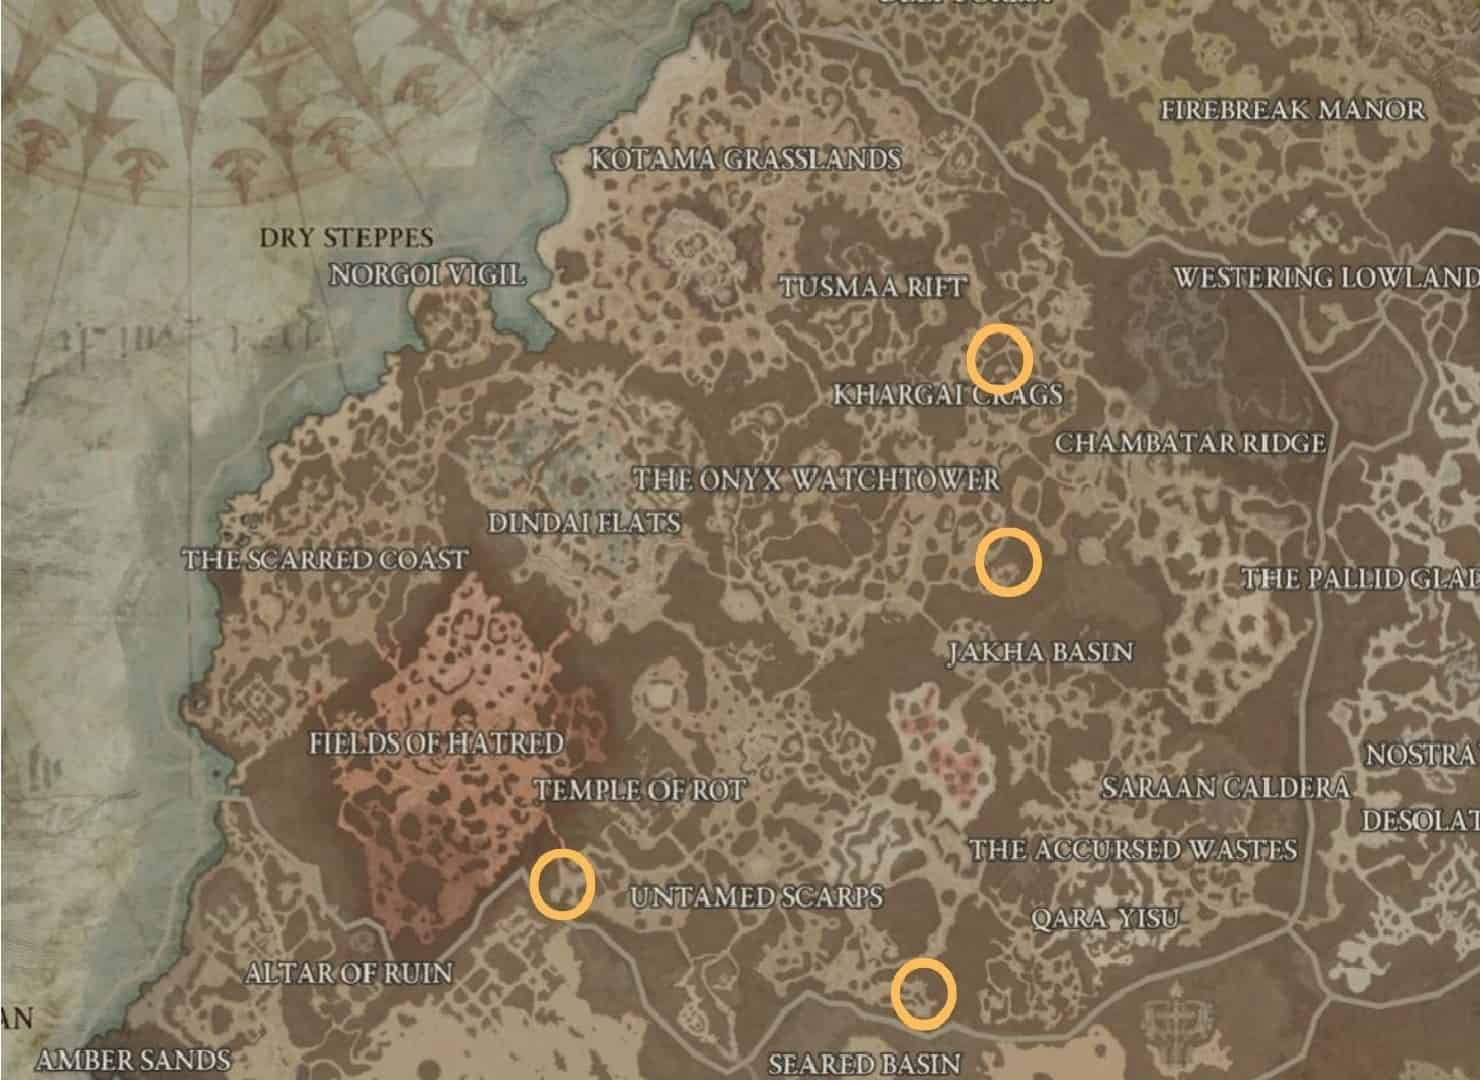 Diablo 4 mystery chest locations: An image of an in-game map with the potential Tortured Gift of Mystery chest spawn locations in Dry Steppes.